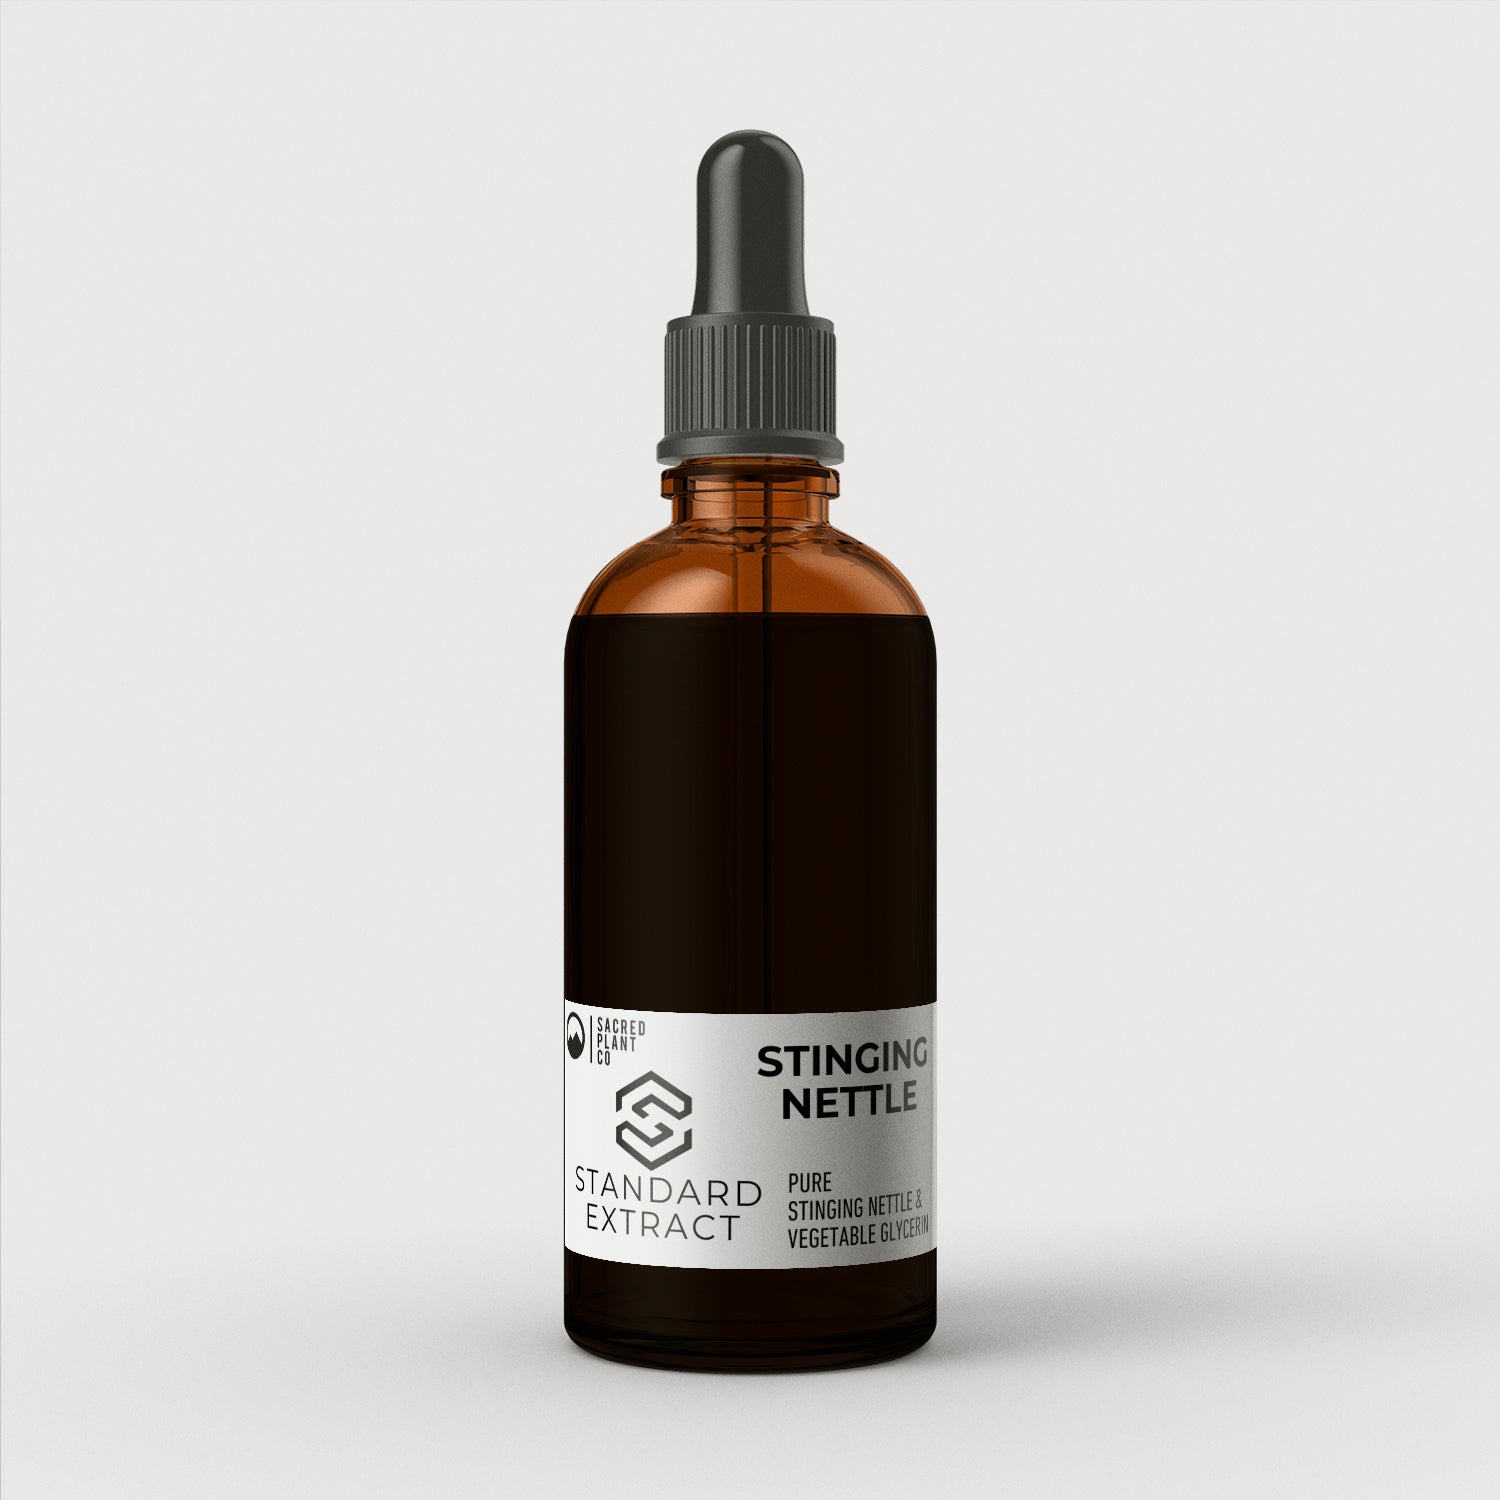 A 30ml bottle of Sacred Plant Co Standard Stinging Nettle Extract Tincture with a black dropper cap on a simple background.